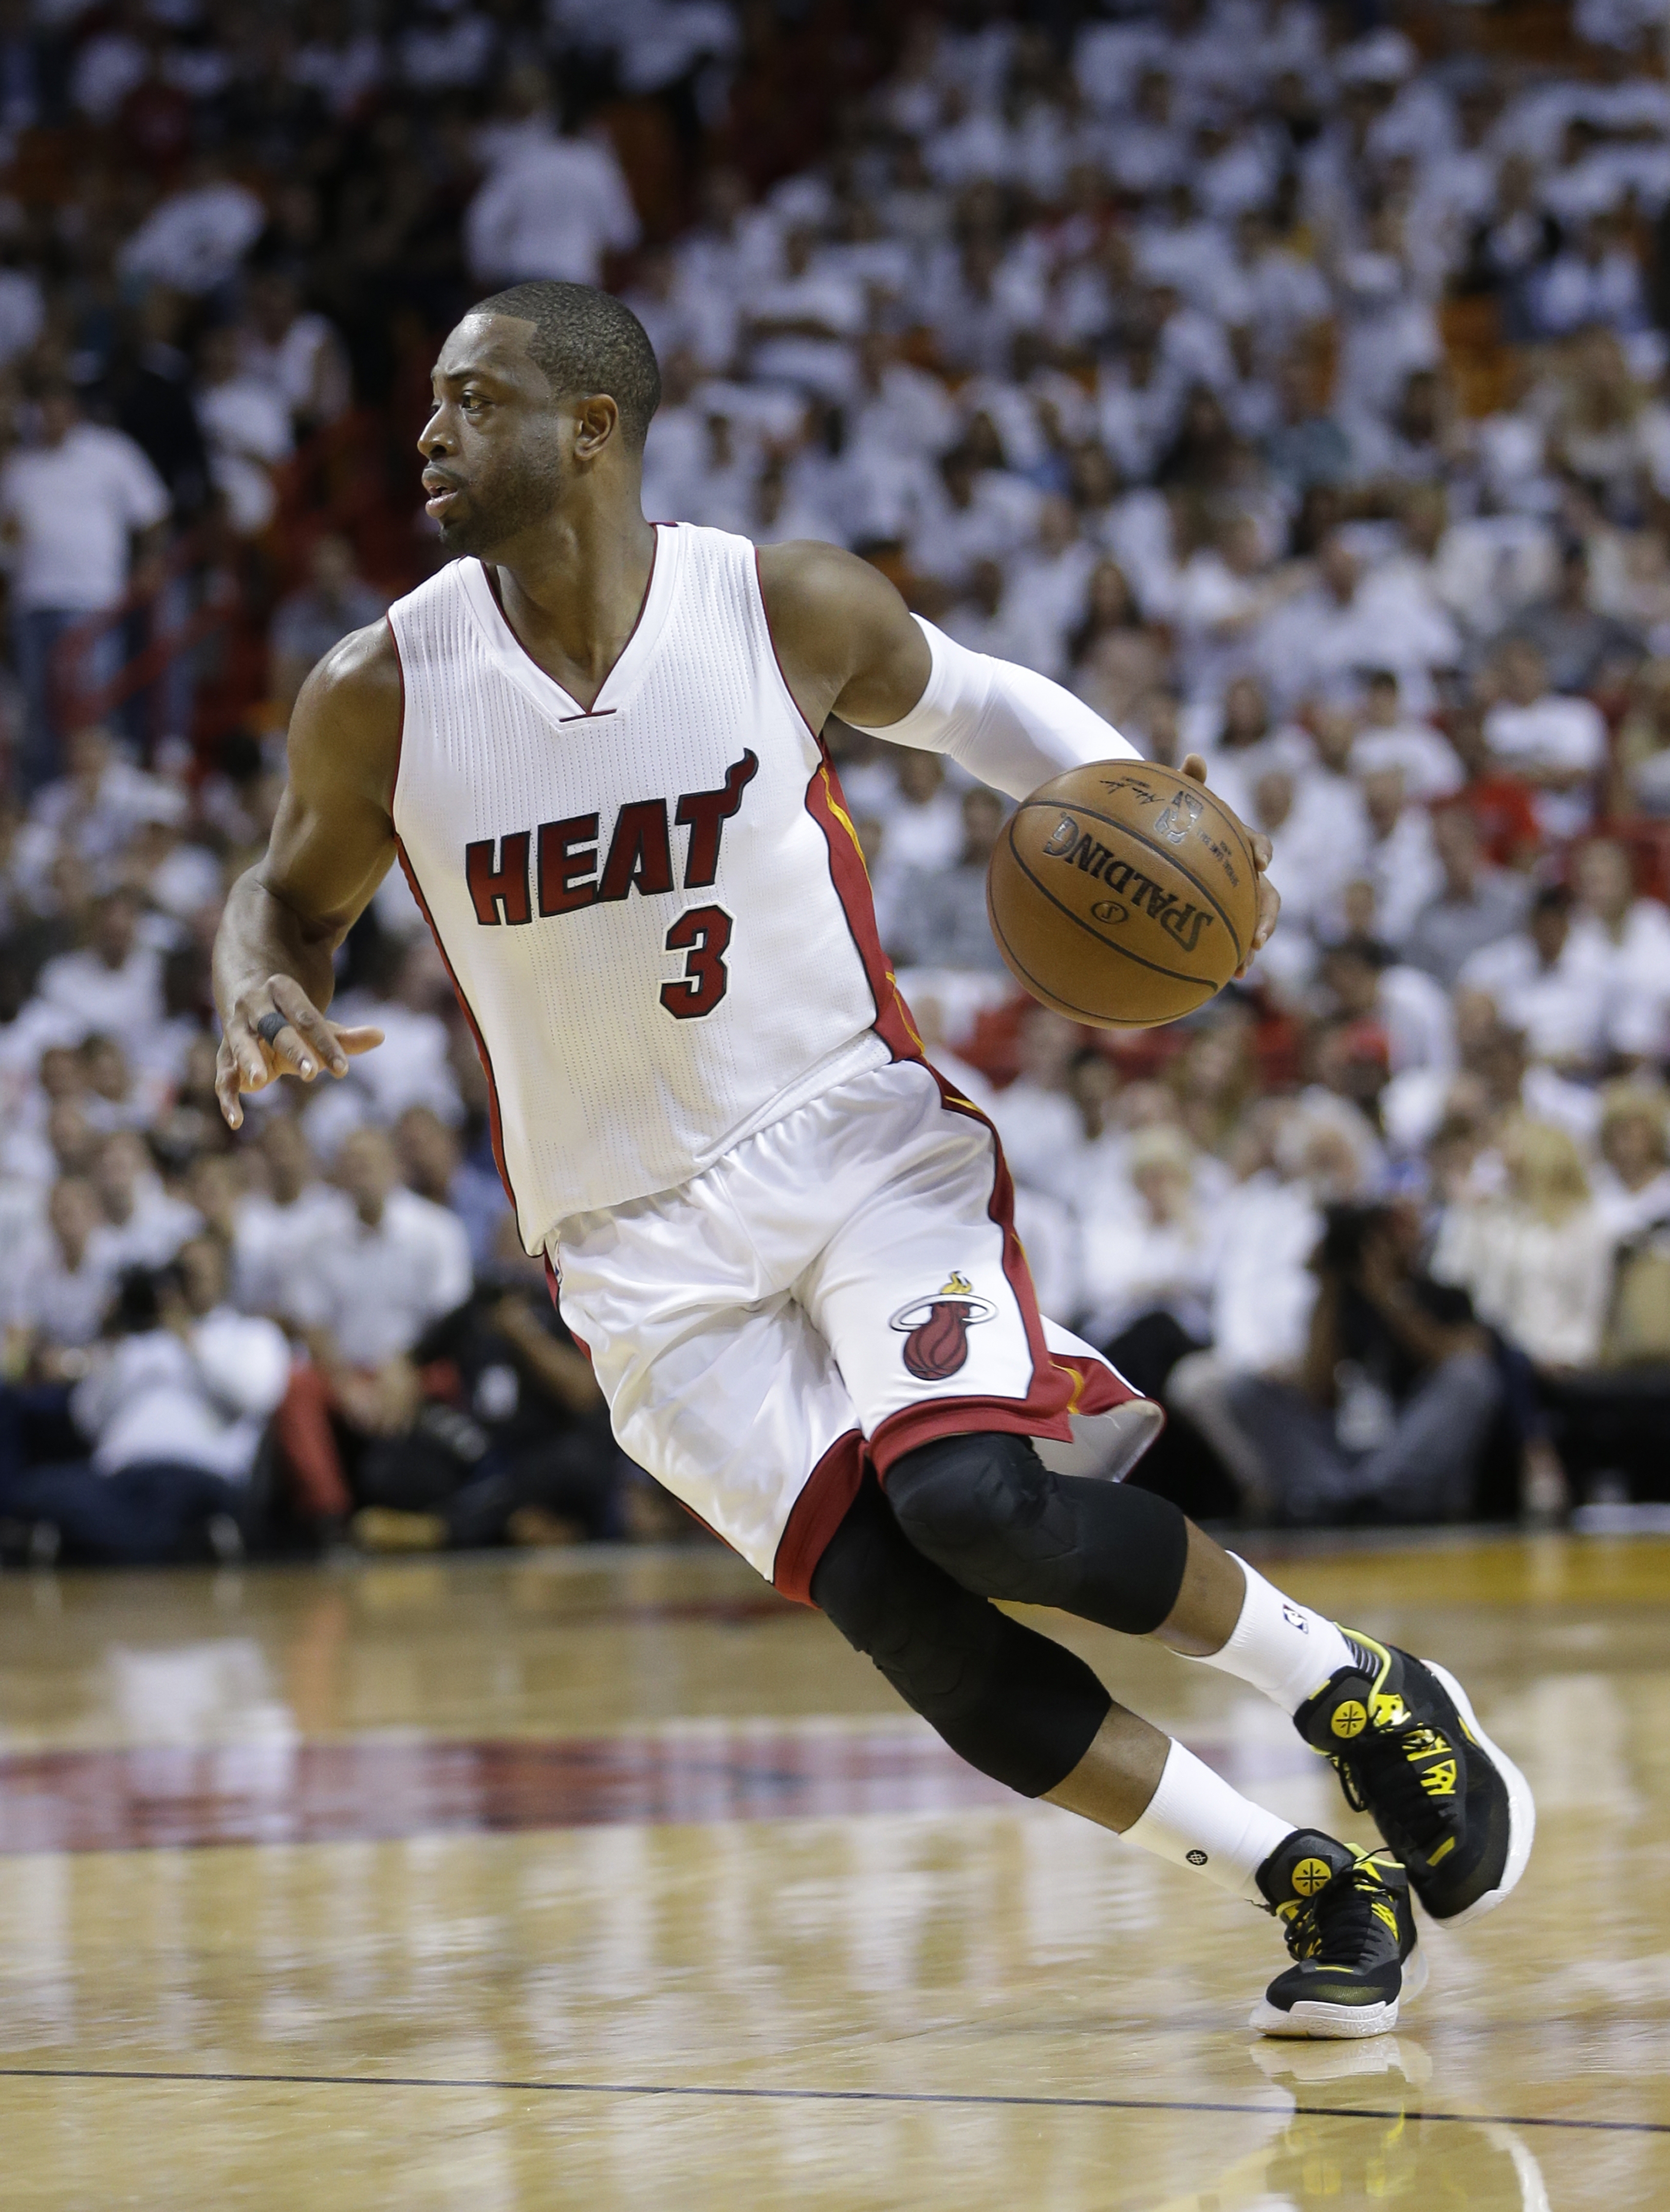 Miami Heat: Hassan Whiteside out for Game 5 vs Raptors